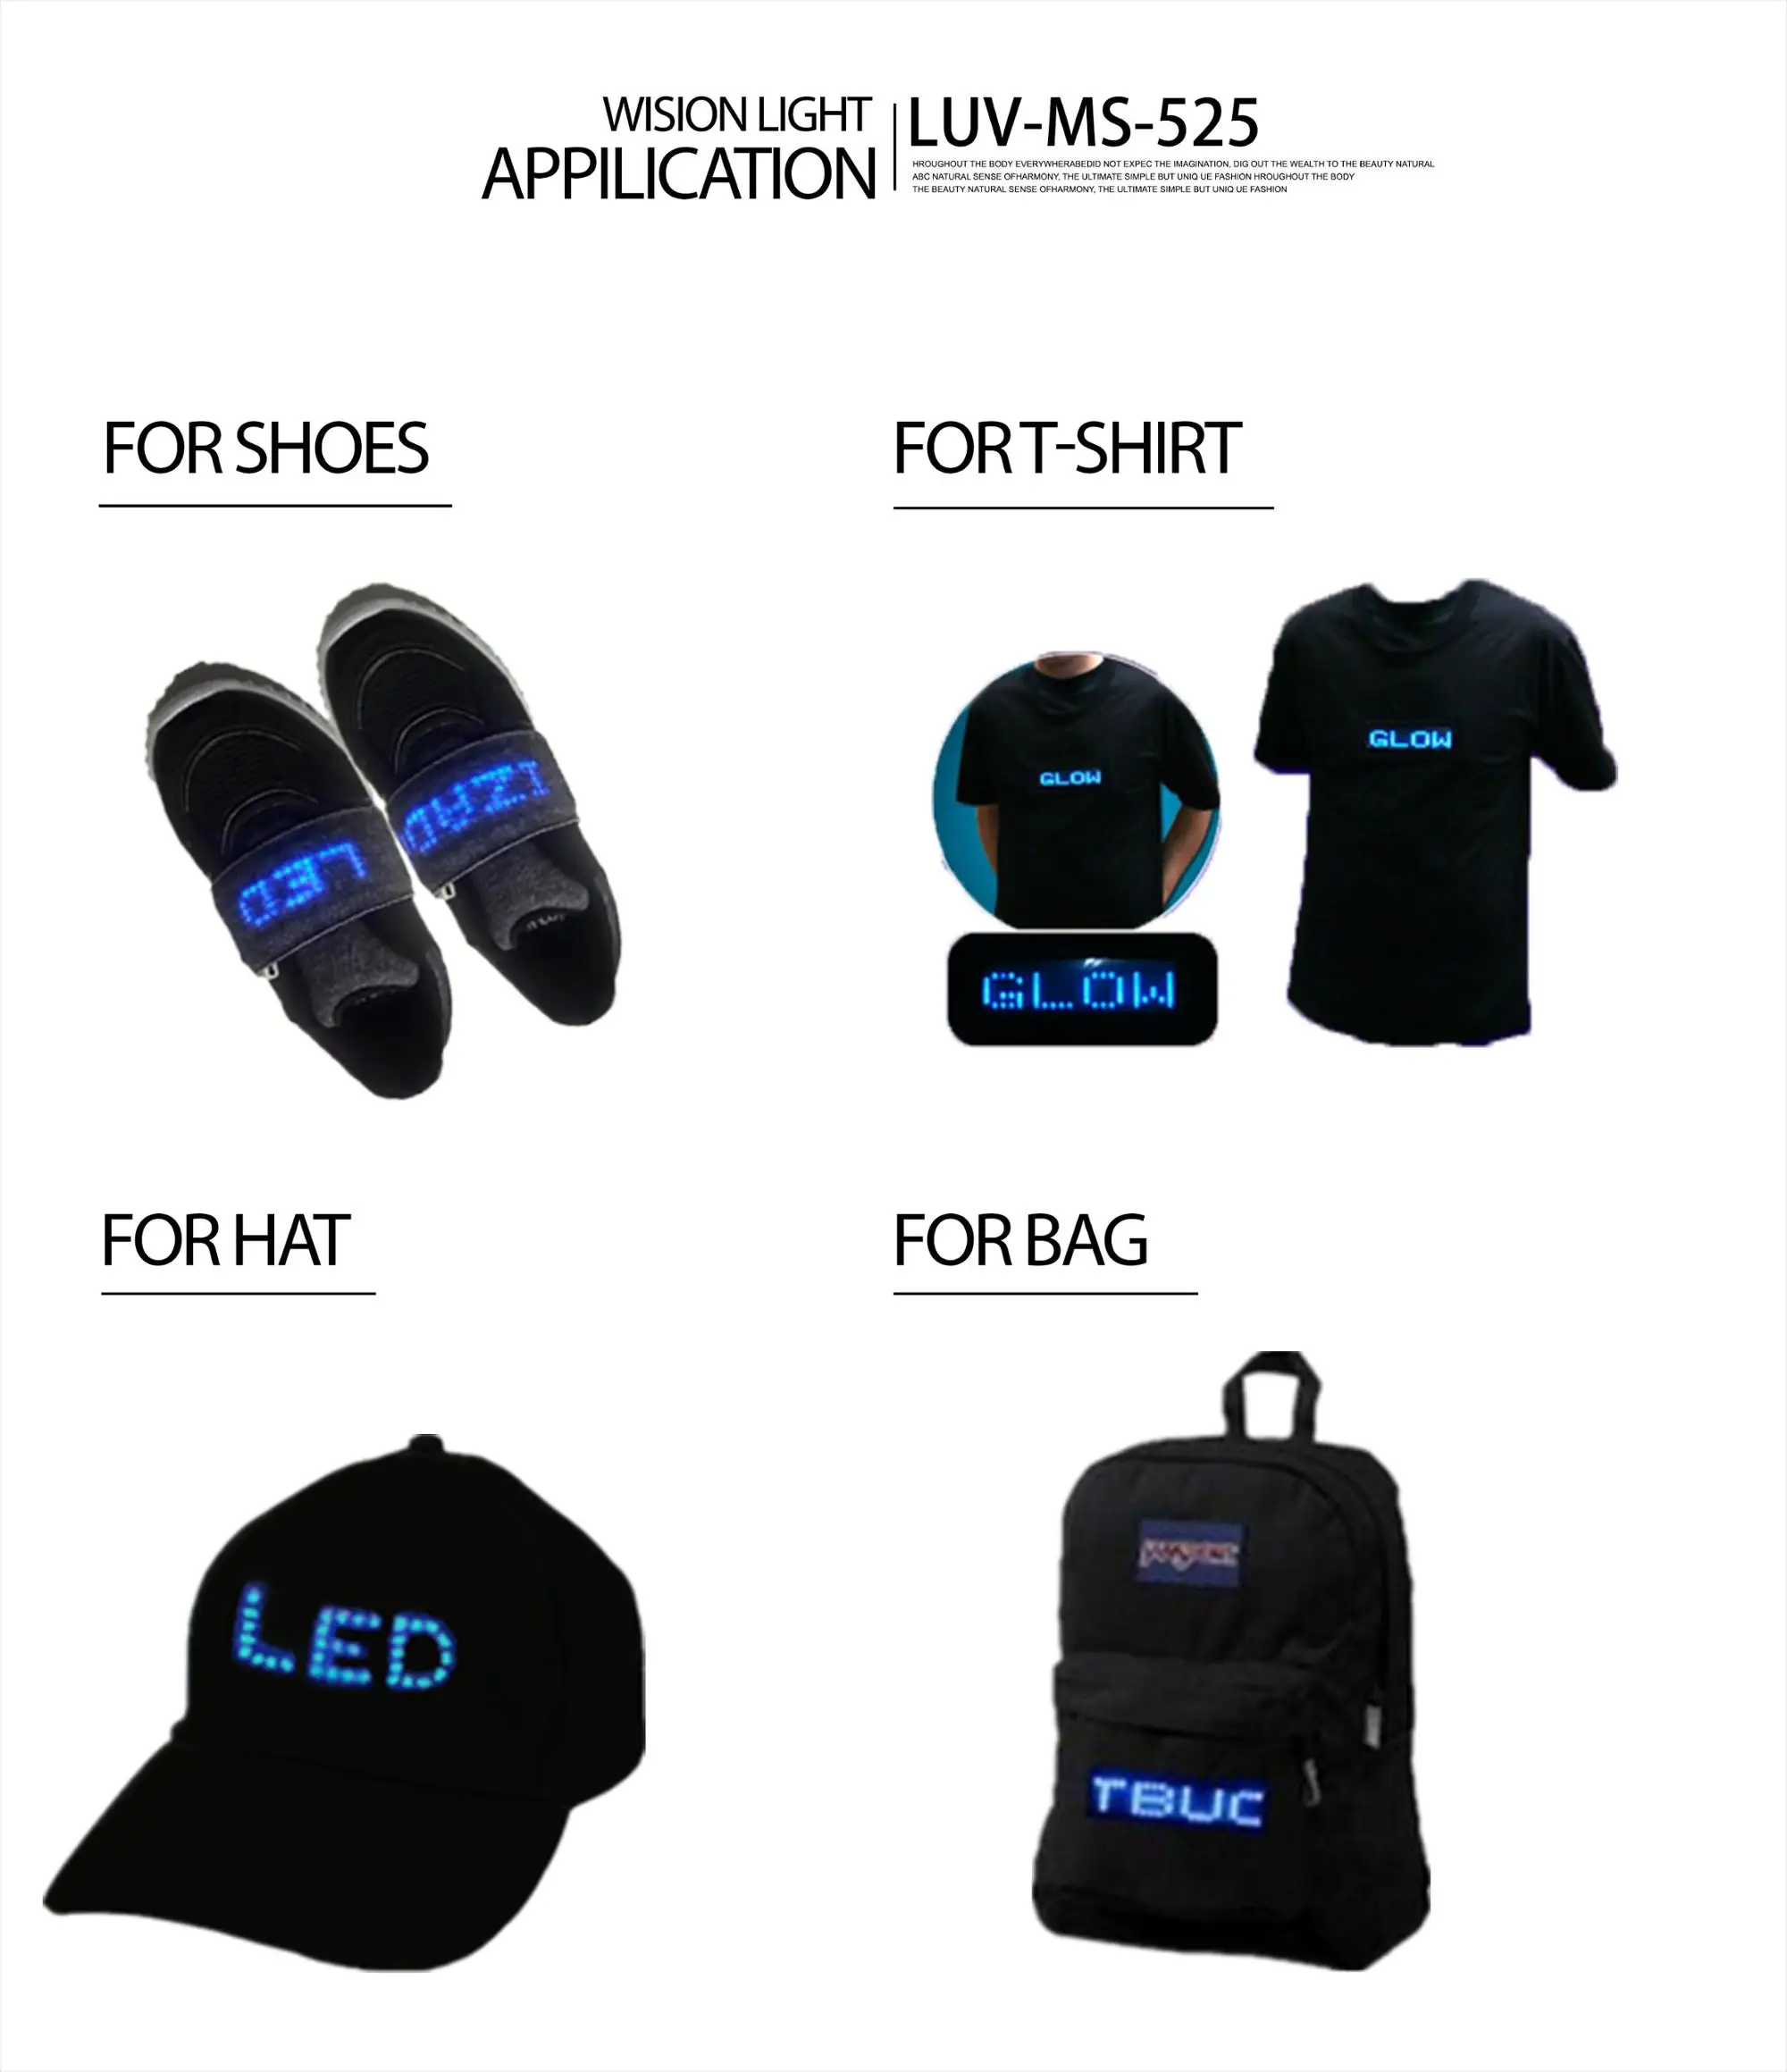 Roblox Id Woman Boy Light Led T Happy Birthday El Flash Shirt Kid Buy Flash Shirt Kids Flash Shirt In Roblox Flash Shirt Id Roblox Product On Alibaba Com - roblox clothes codes for boys hats